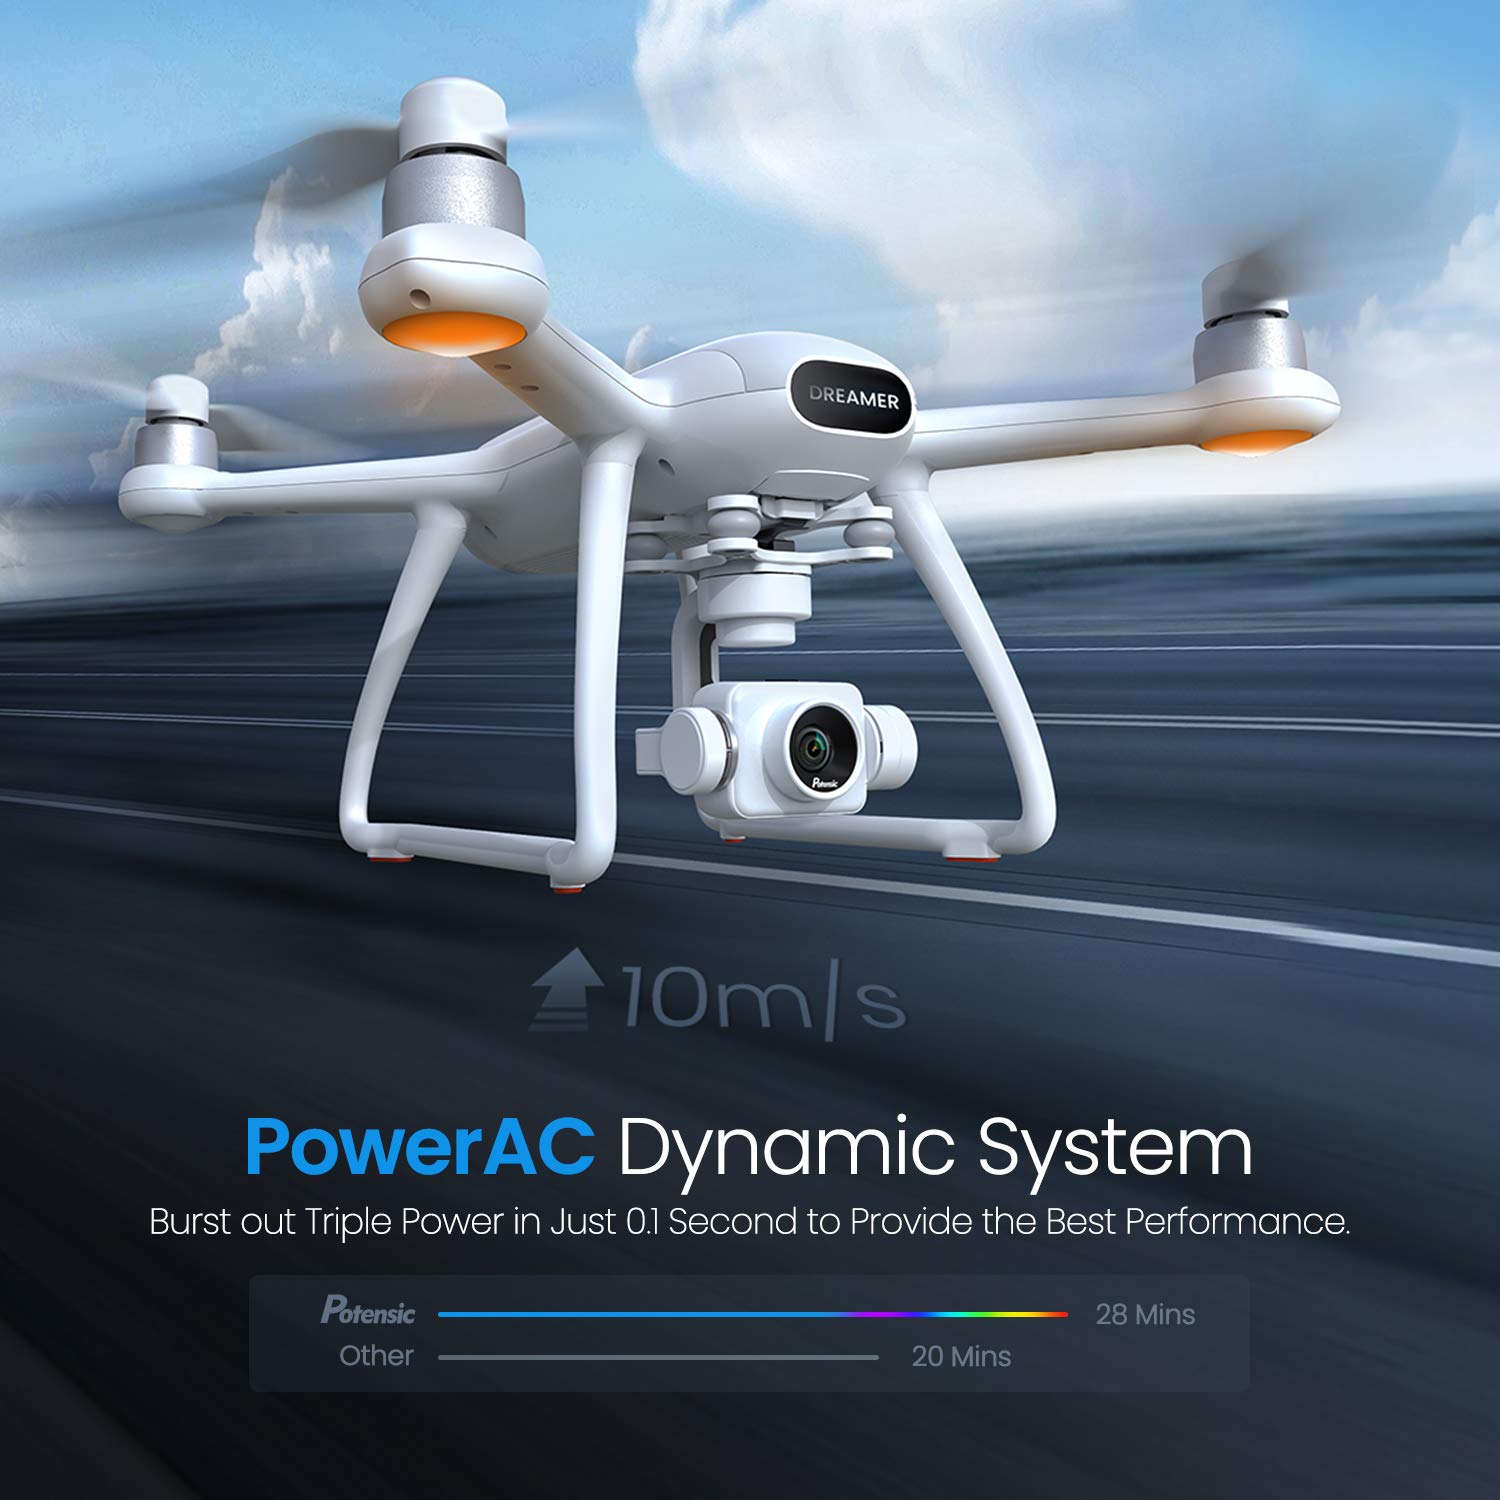 DREAMER Pro GPS 4K Drone with 3 Axis Gimbal Camera